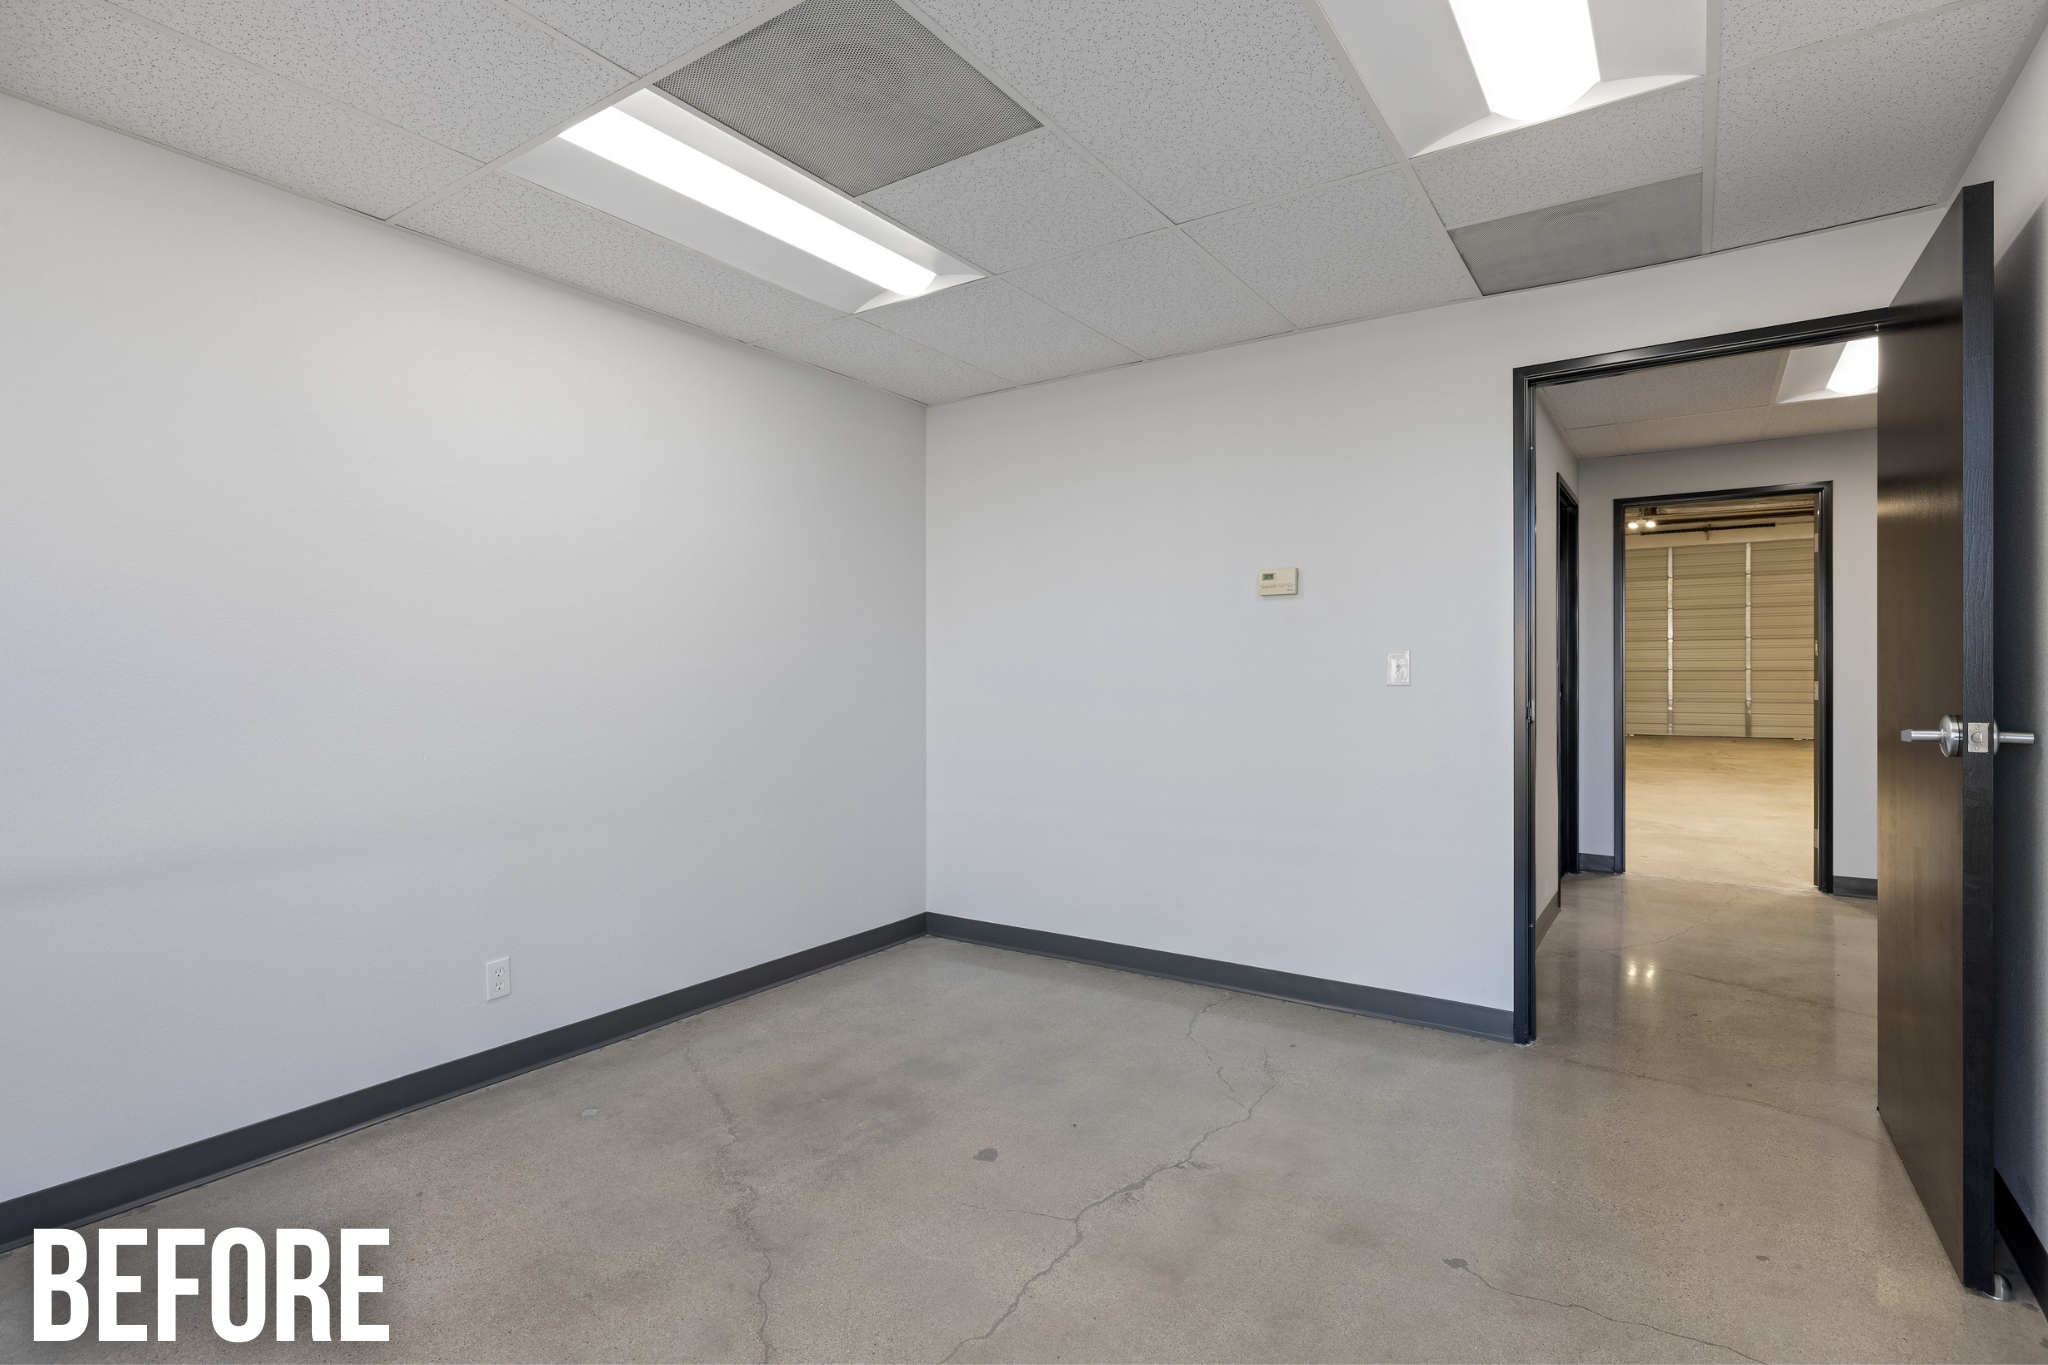 Square Foot Productions Virtual Staging - before image of a small, empty entryway of a commercial building